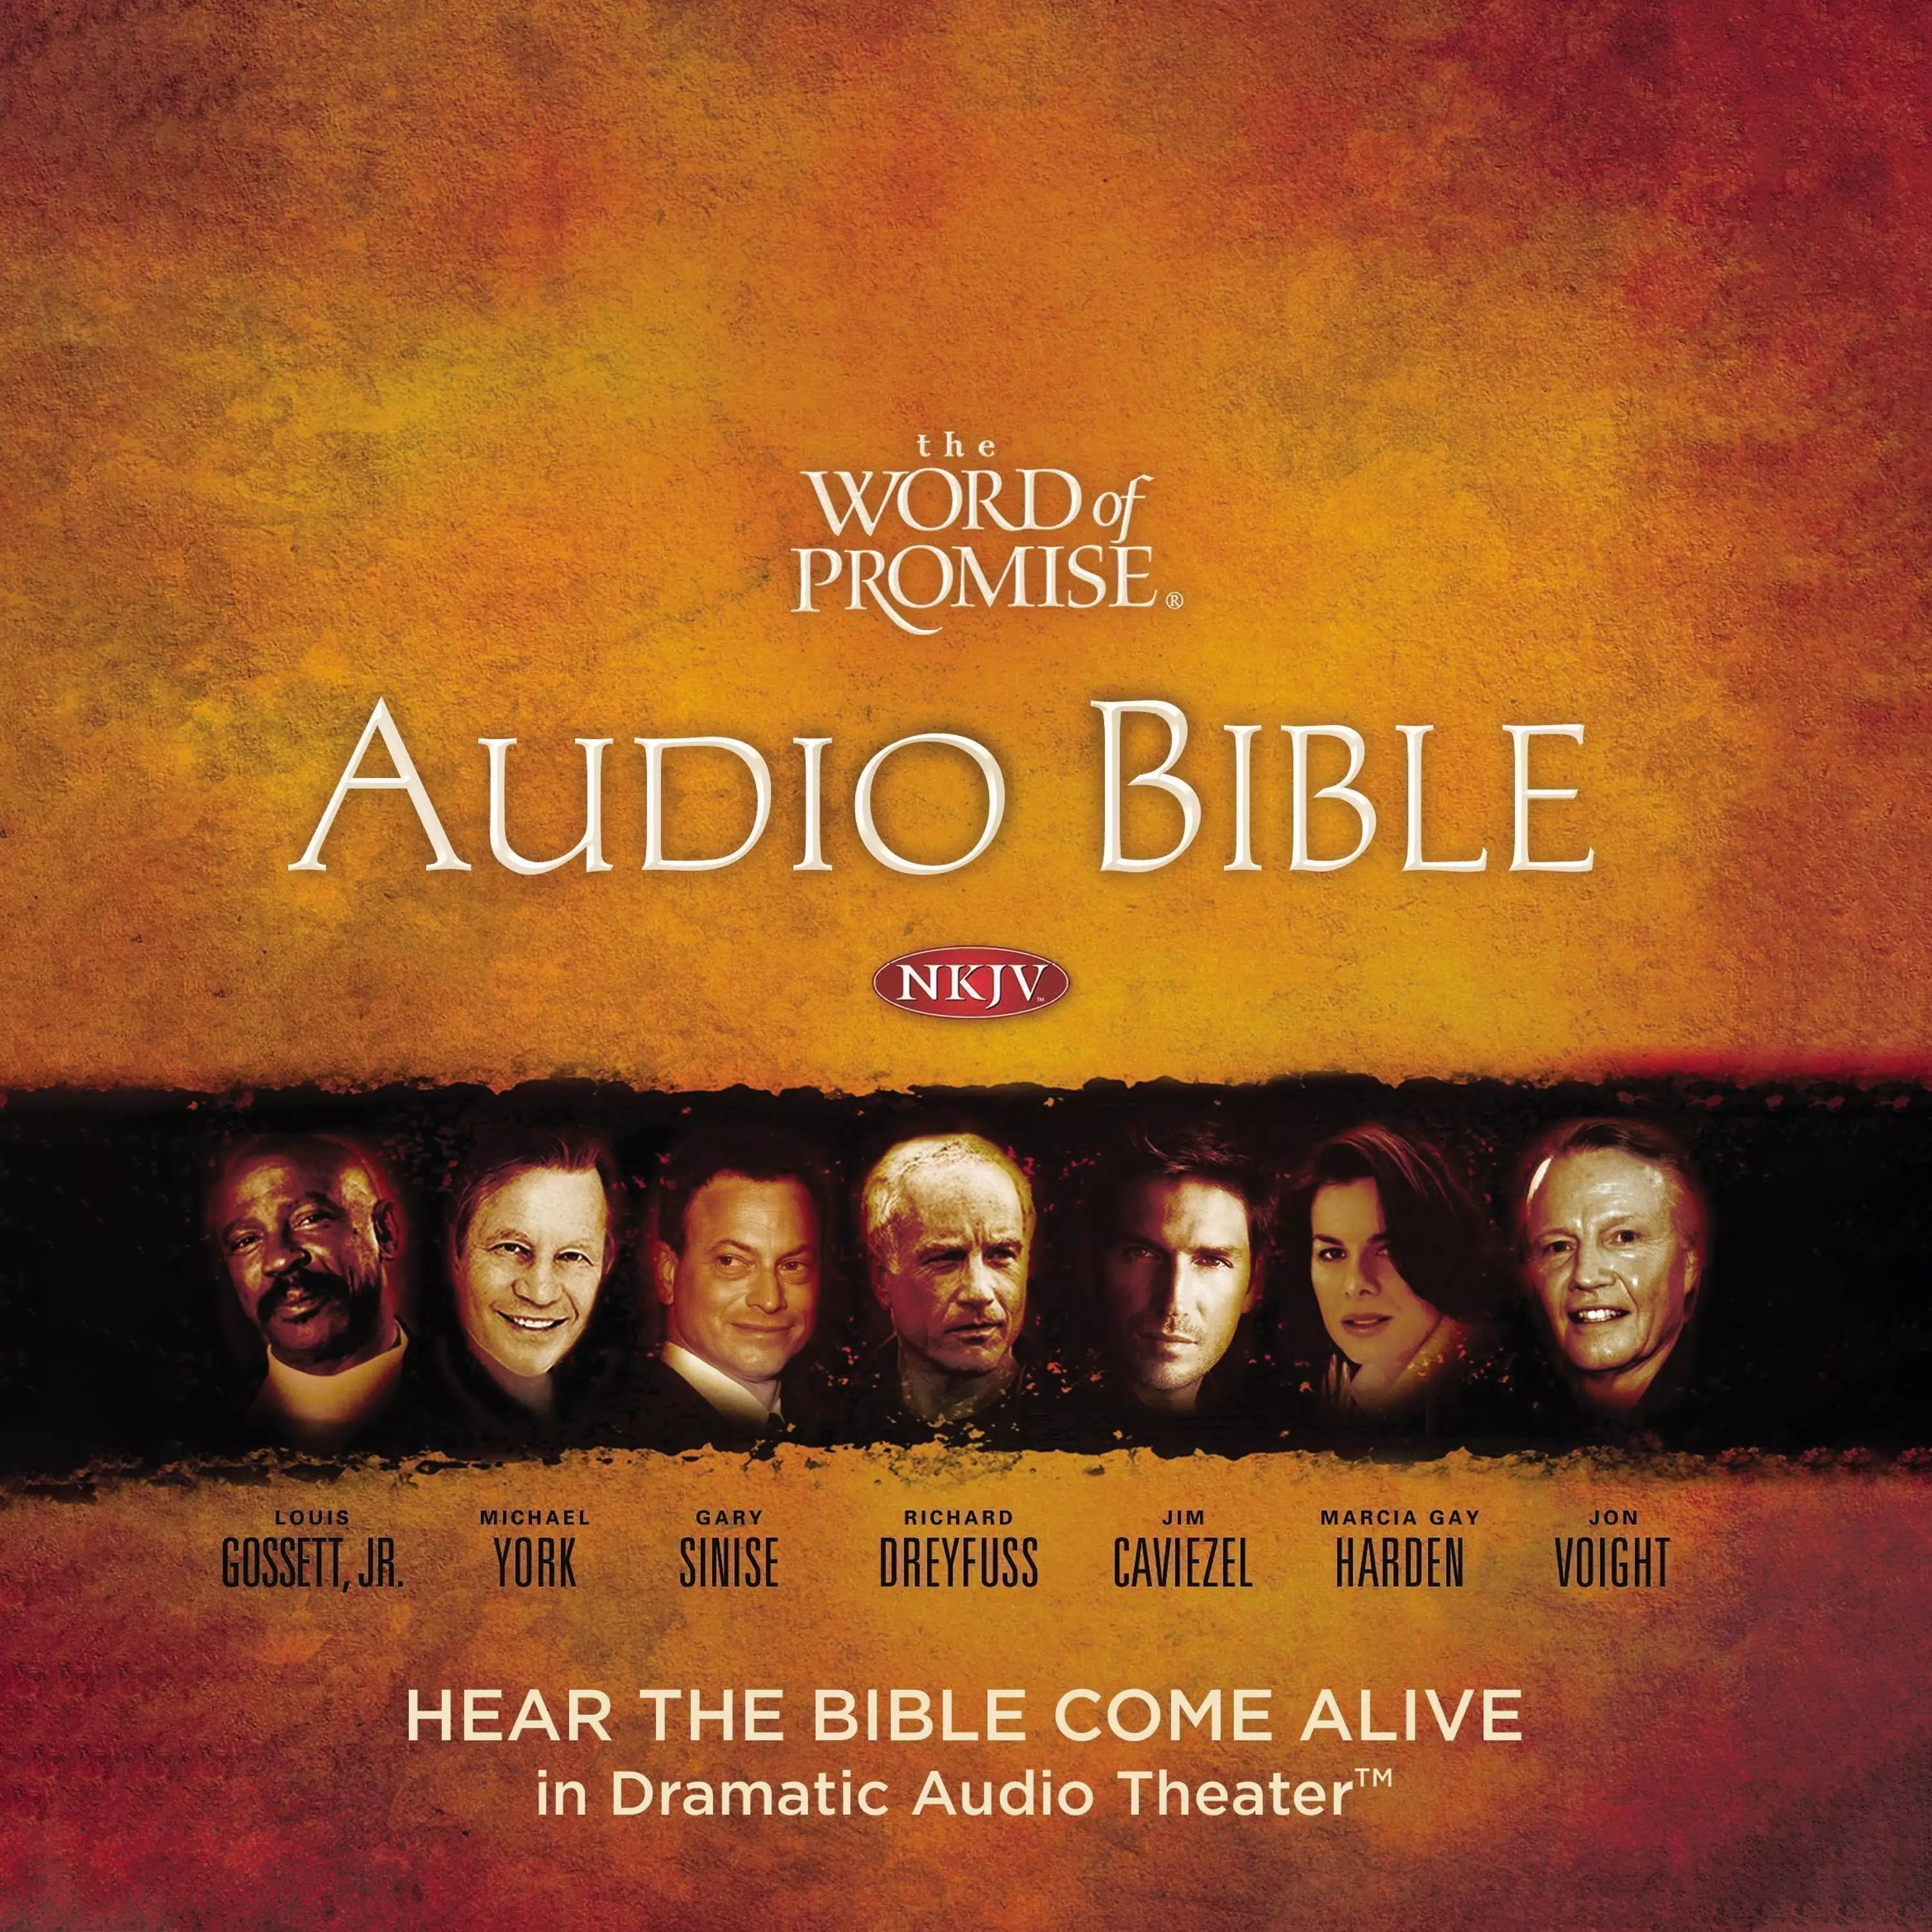 Word of Promise Audio Bible - New King James Version, NKJV: (12) 1 Chronicles